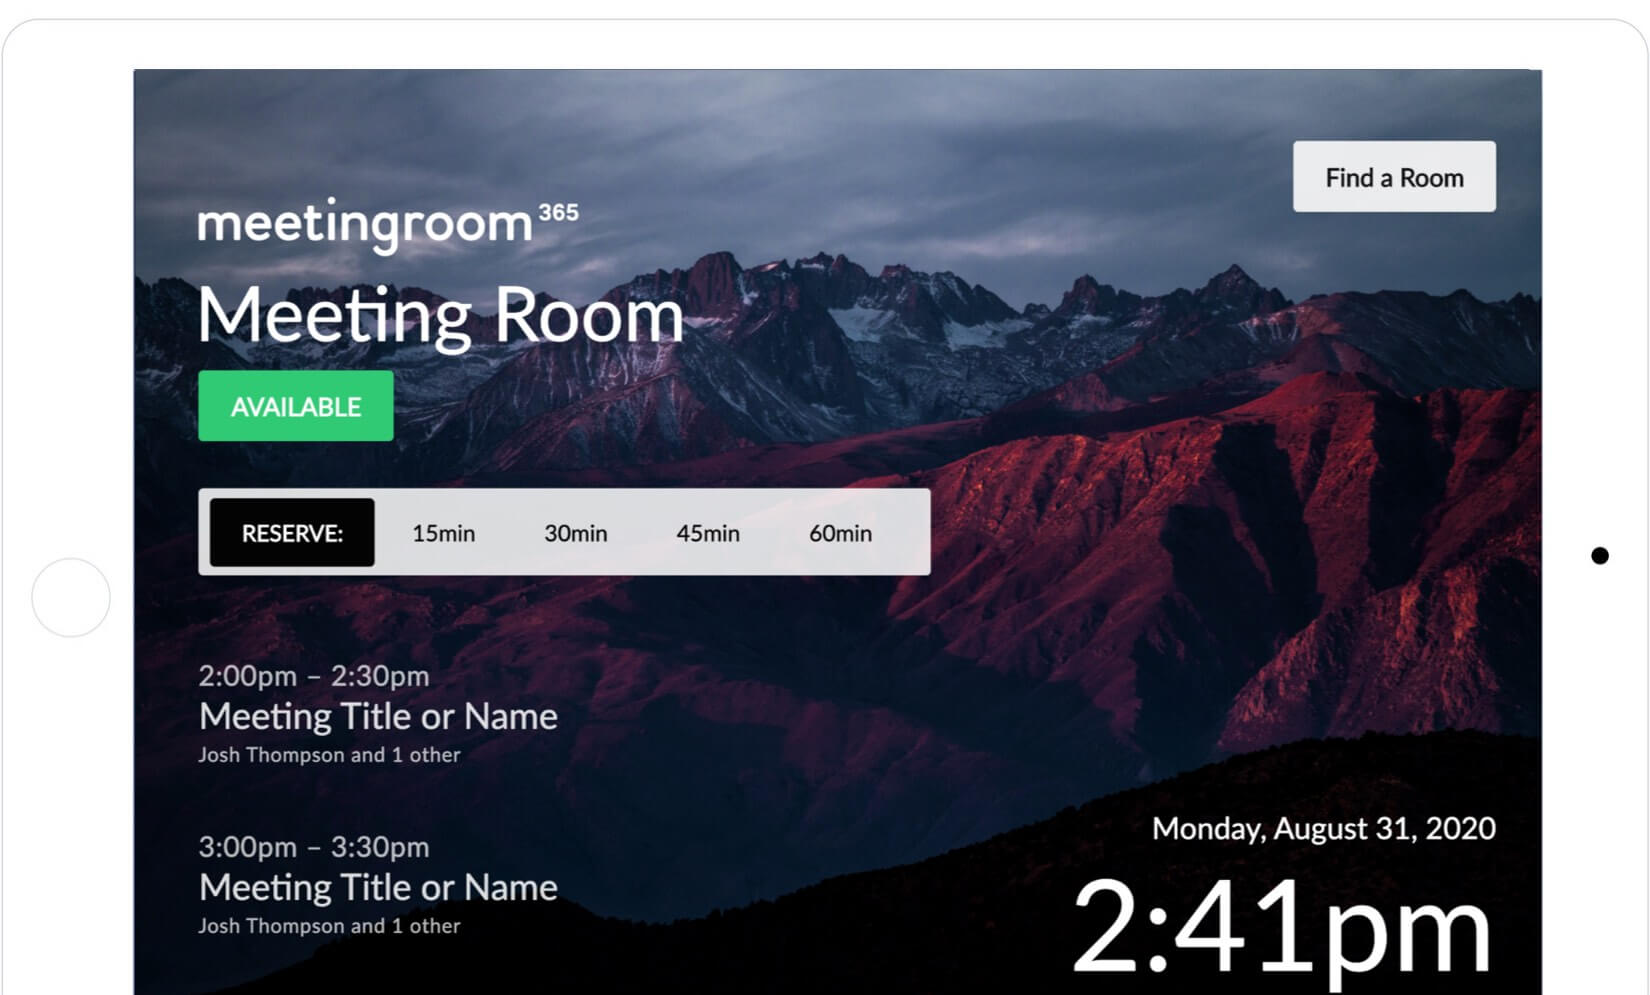 Meeting Room Display Software for Office 365, Exchange, and Google  Workspace - Meeting Room 365